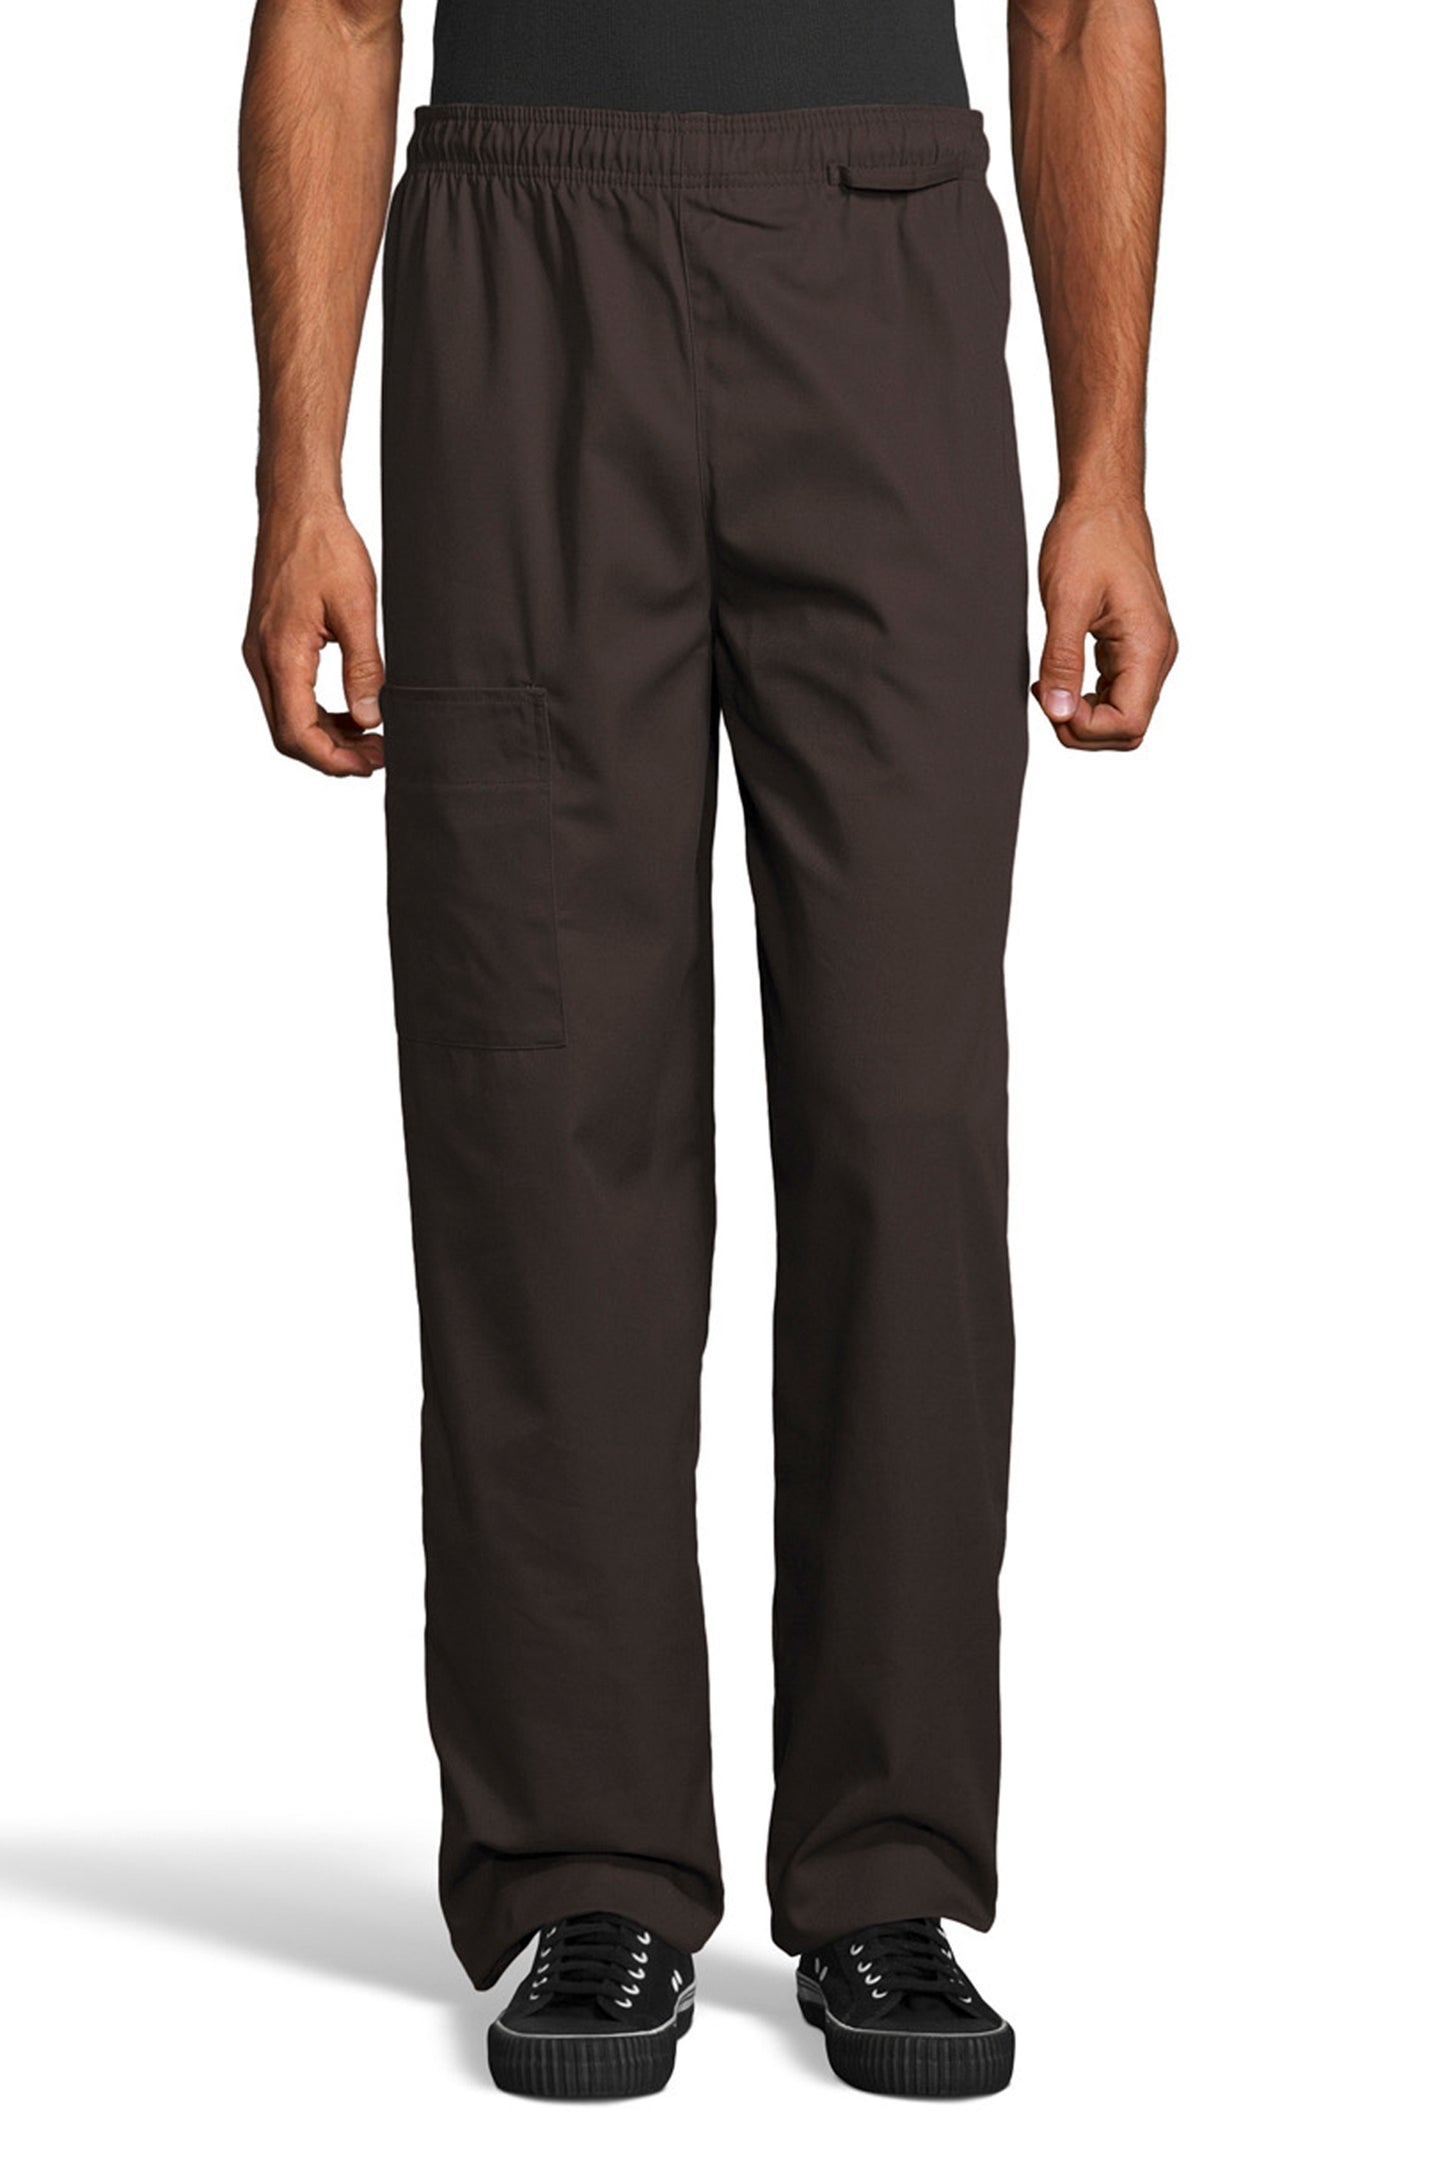 Uncommon Cargo Pant #4100 *Closeout* (All Sales Final No Returns)